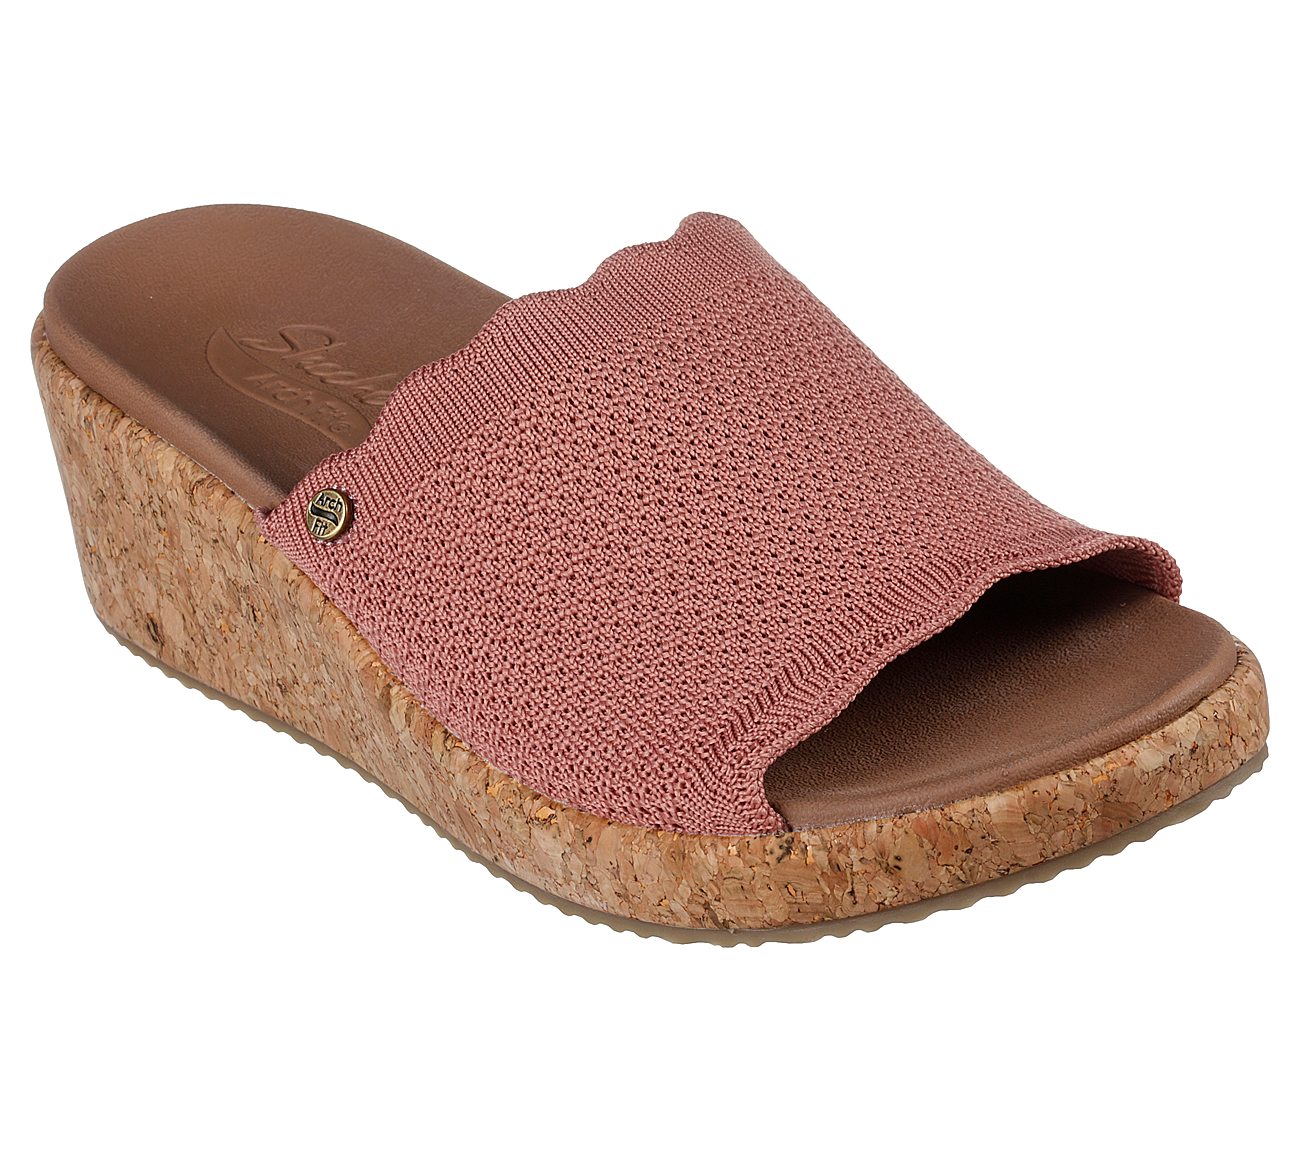 ARCH FIT BEVERLEE - JEMMA, ROSE Footwear Right View